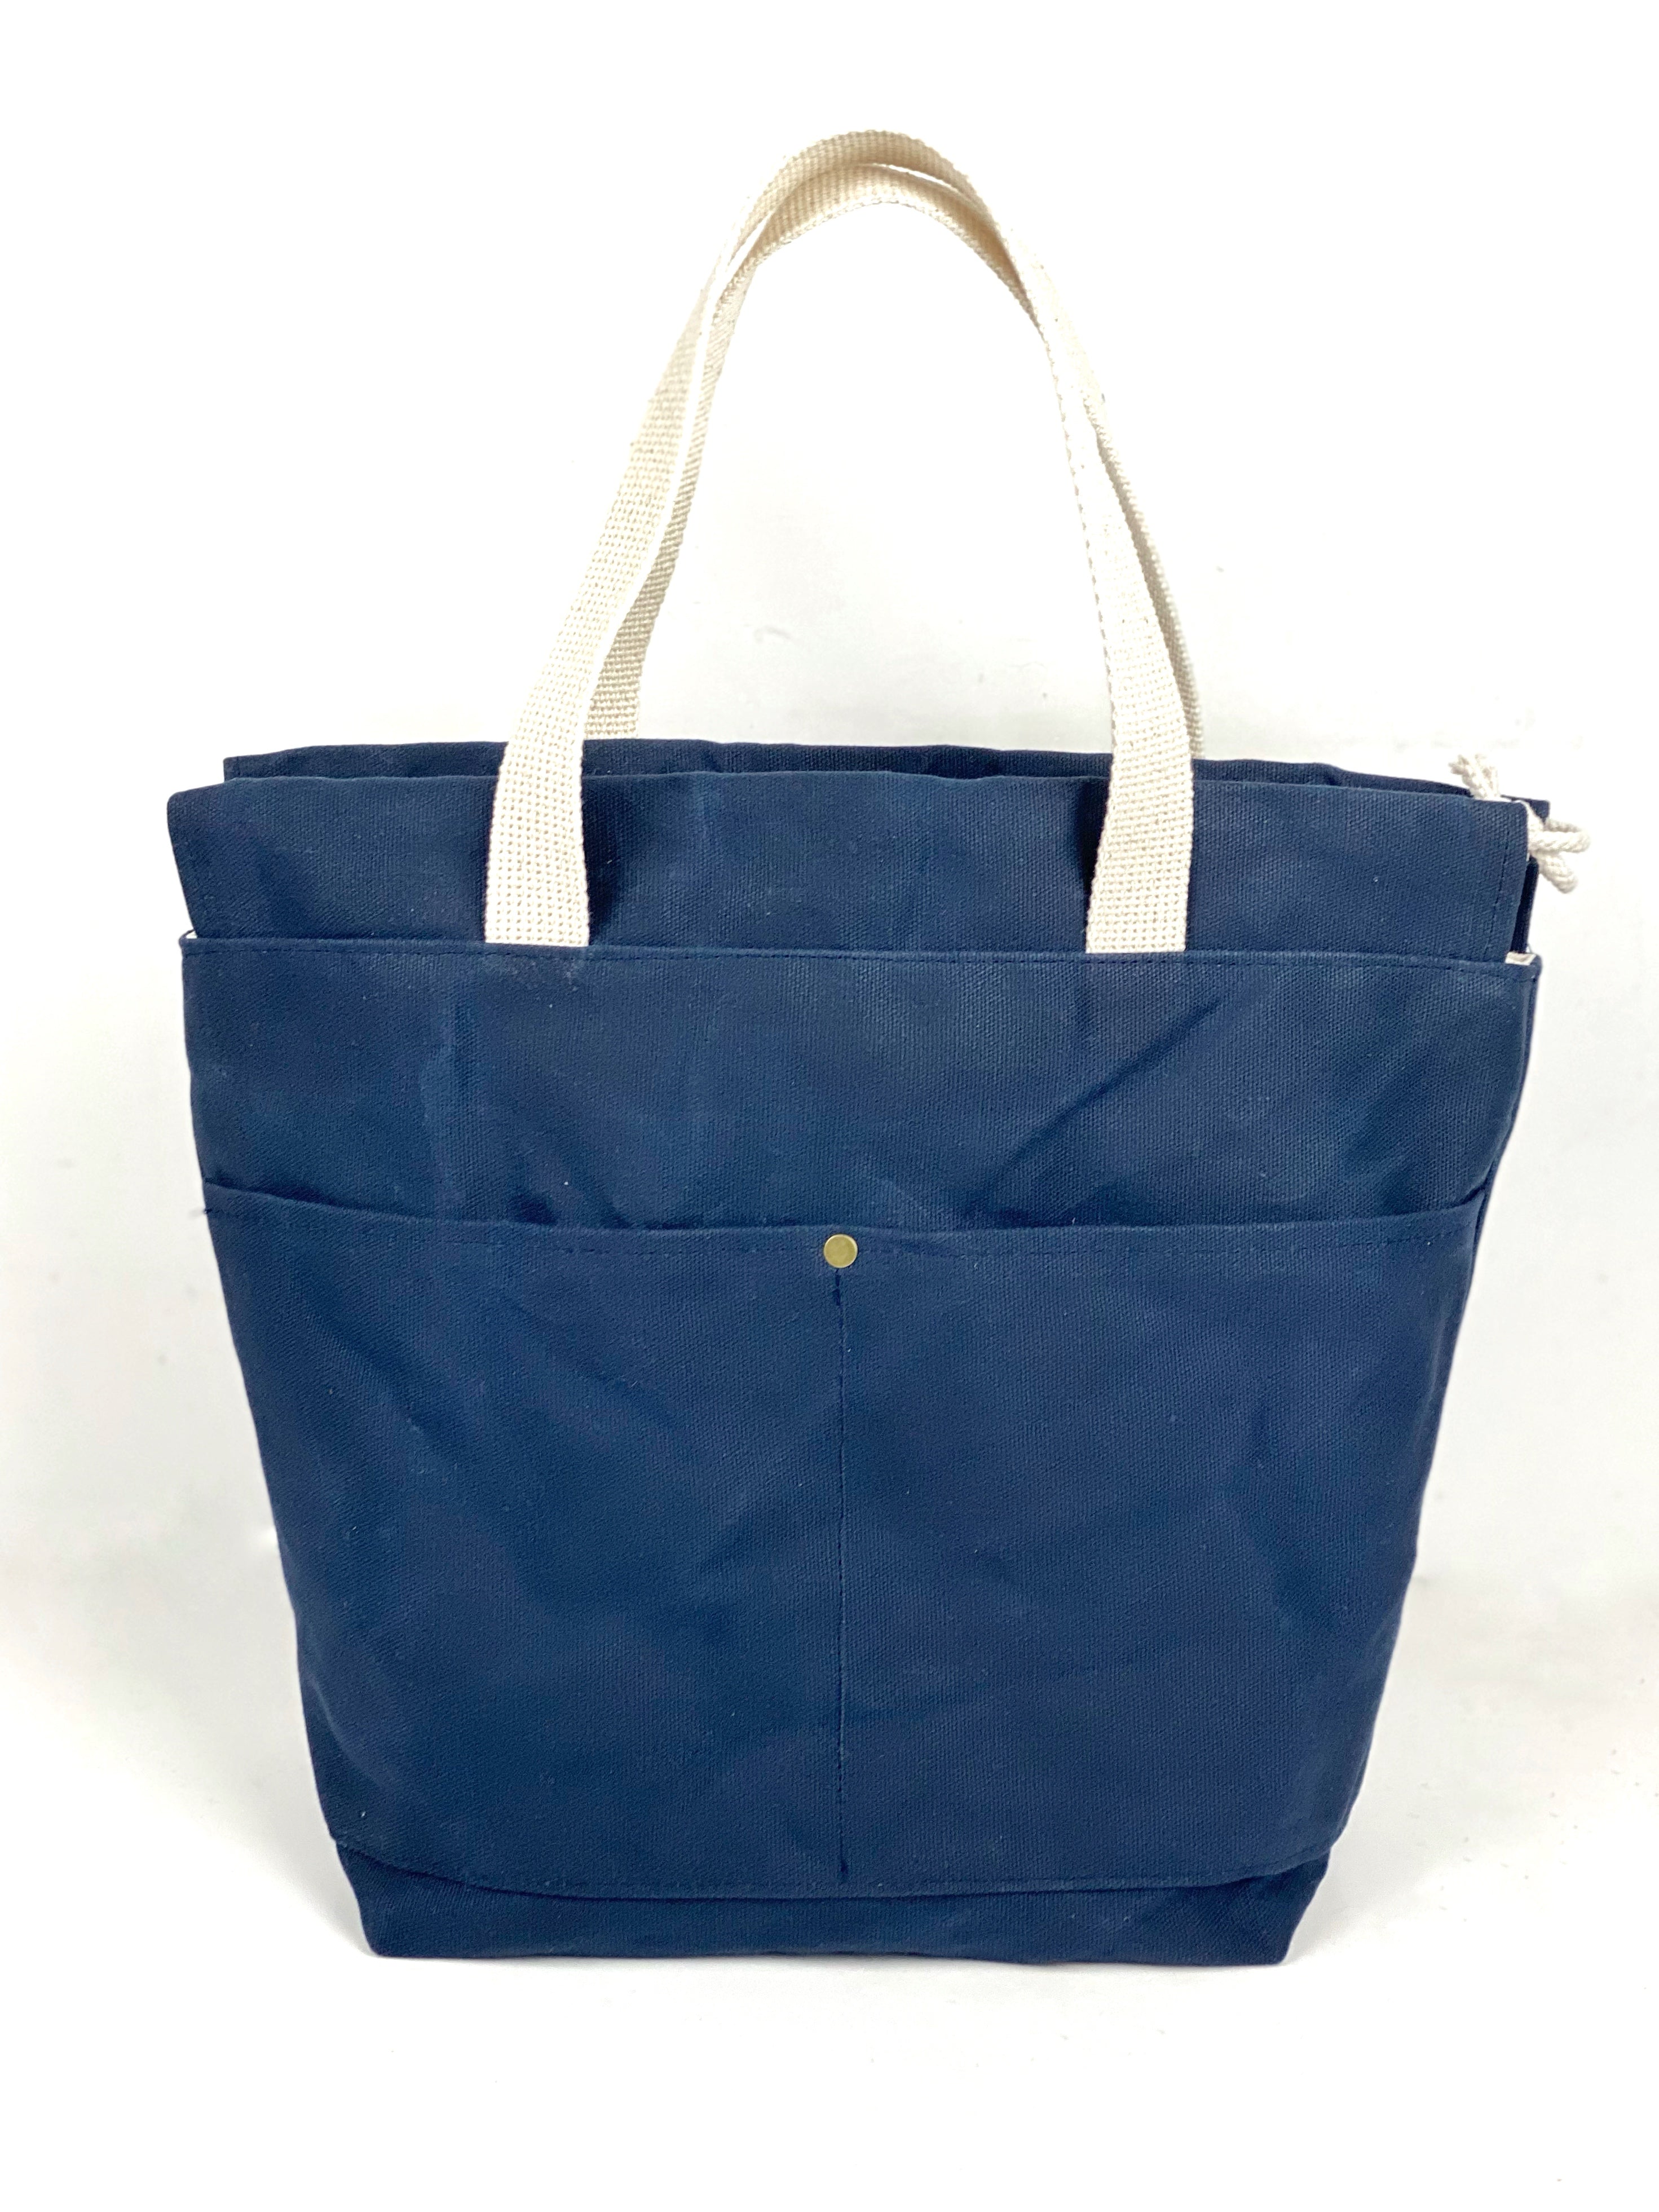 Solid Color Waxed Canvas Project Bag Knit or Crochet Drawstring Tote Strap Flat Bottom